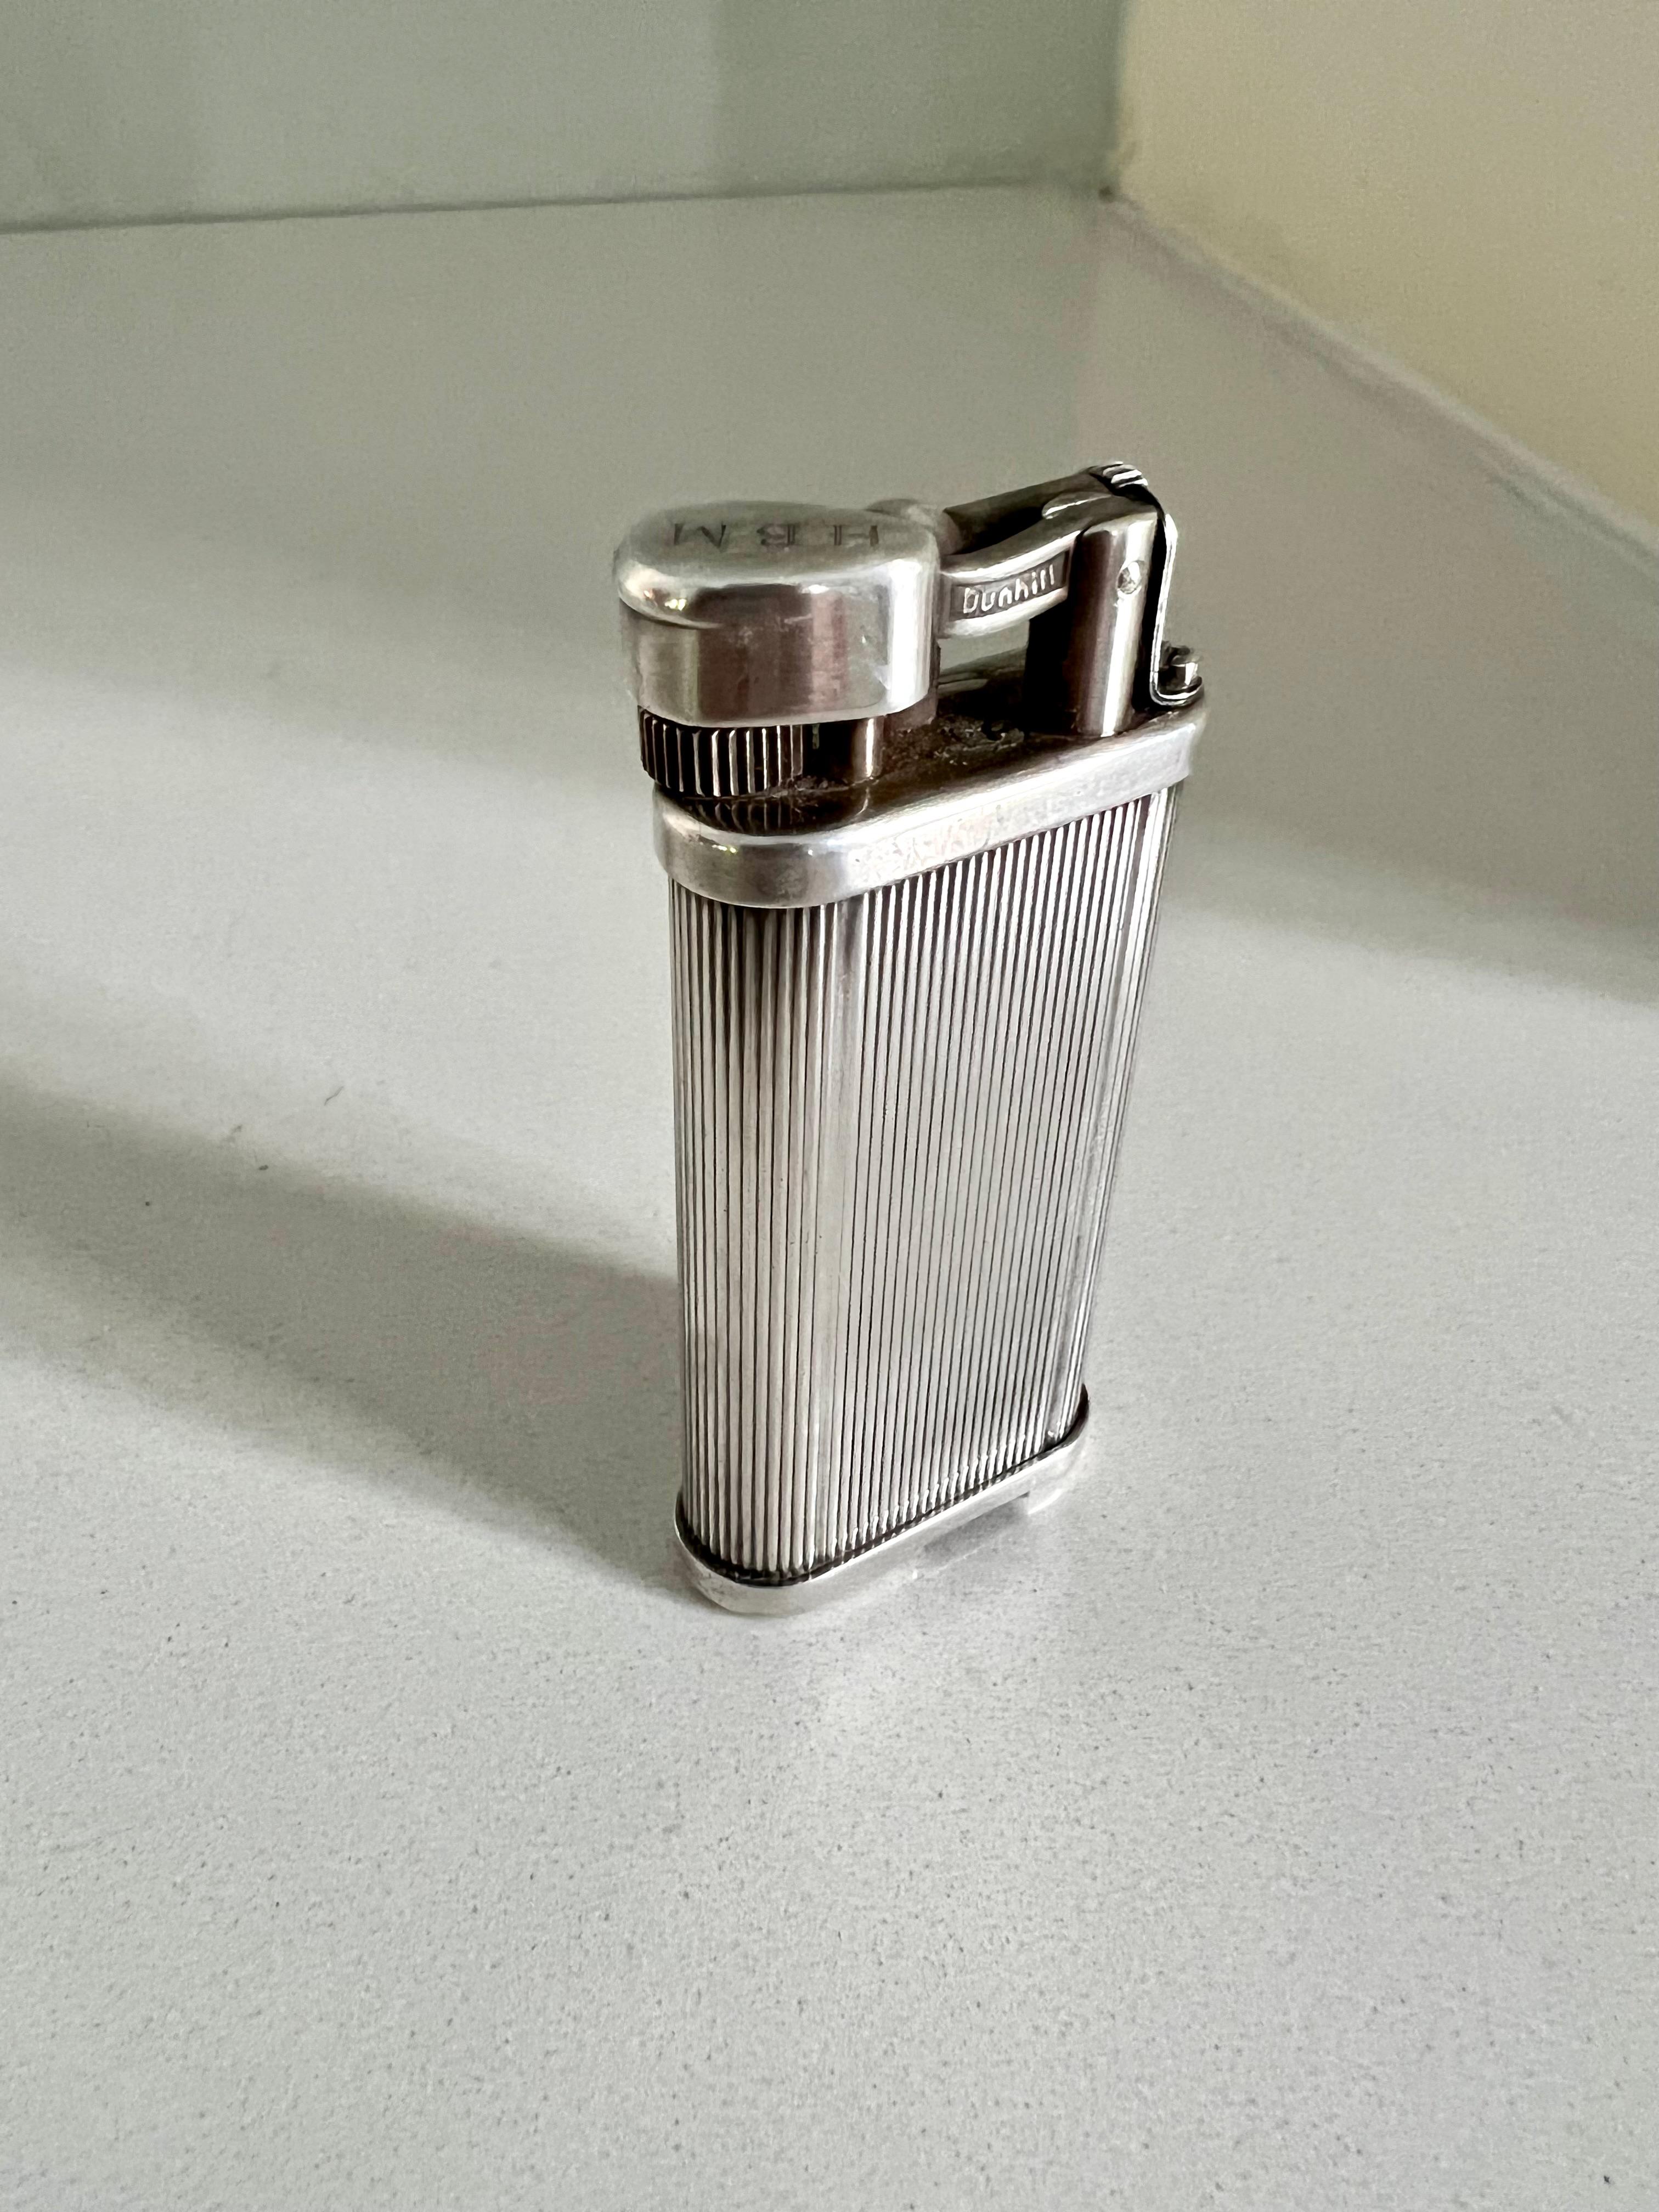 Dunhill silver-plate Unique pocket lighter. Silver plated brass in a classic design dating to 1920. Fine pinstripes etched vertically into the body. A good weight to this pocket lighter. In great working condition. 

As seen in James Bond: License